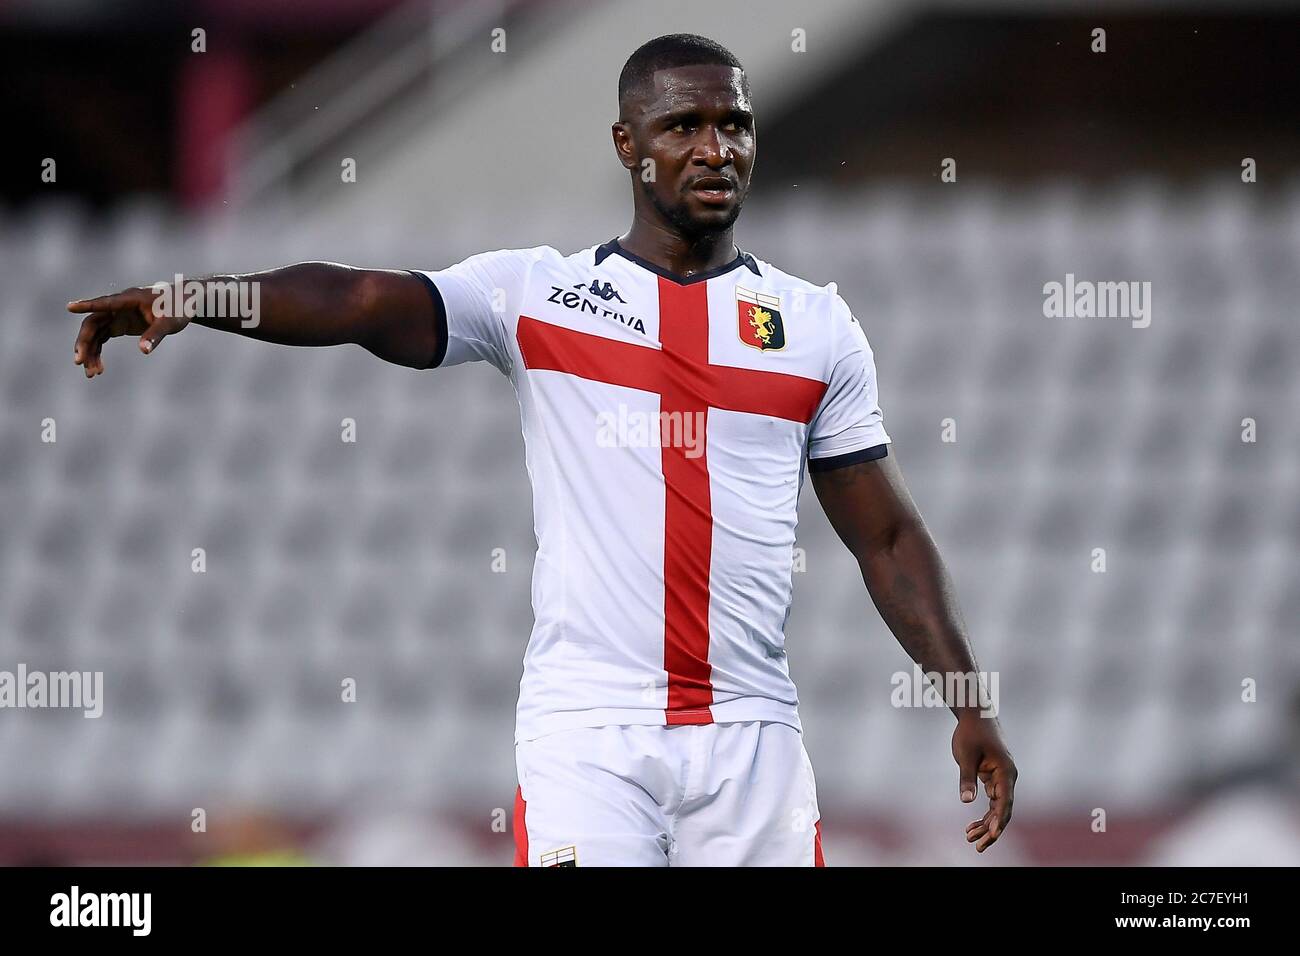 Turin, Italy. 16th July, 2020. TURIN, ITALY - July 16, 2020: Cristian Zapata of Genoa CFC gestures during the Serie A football match between Torino FC and Genoa CFC. Torino FC won 3-0 over Genoa CFC. (Photo by Nicolò Campo/Sipa USA) Credit: Sipa USA/Alamy Live News Stock Photo